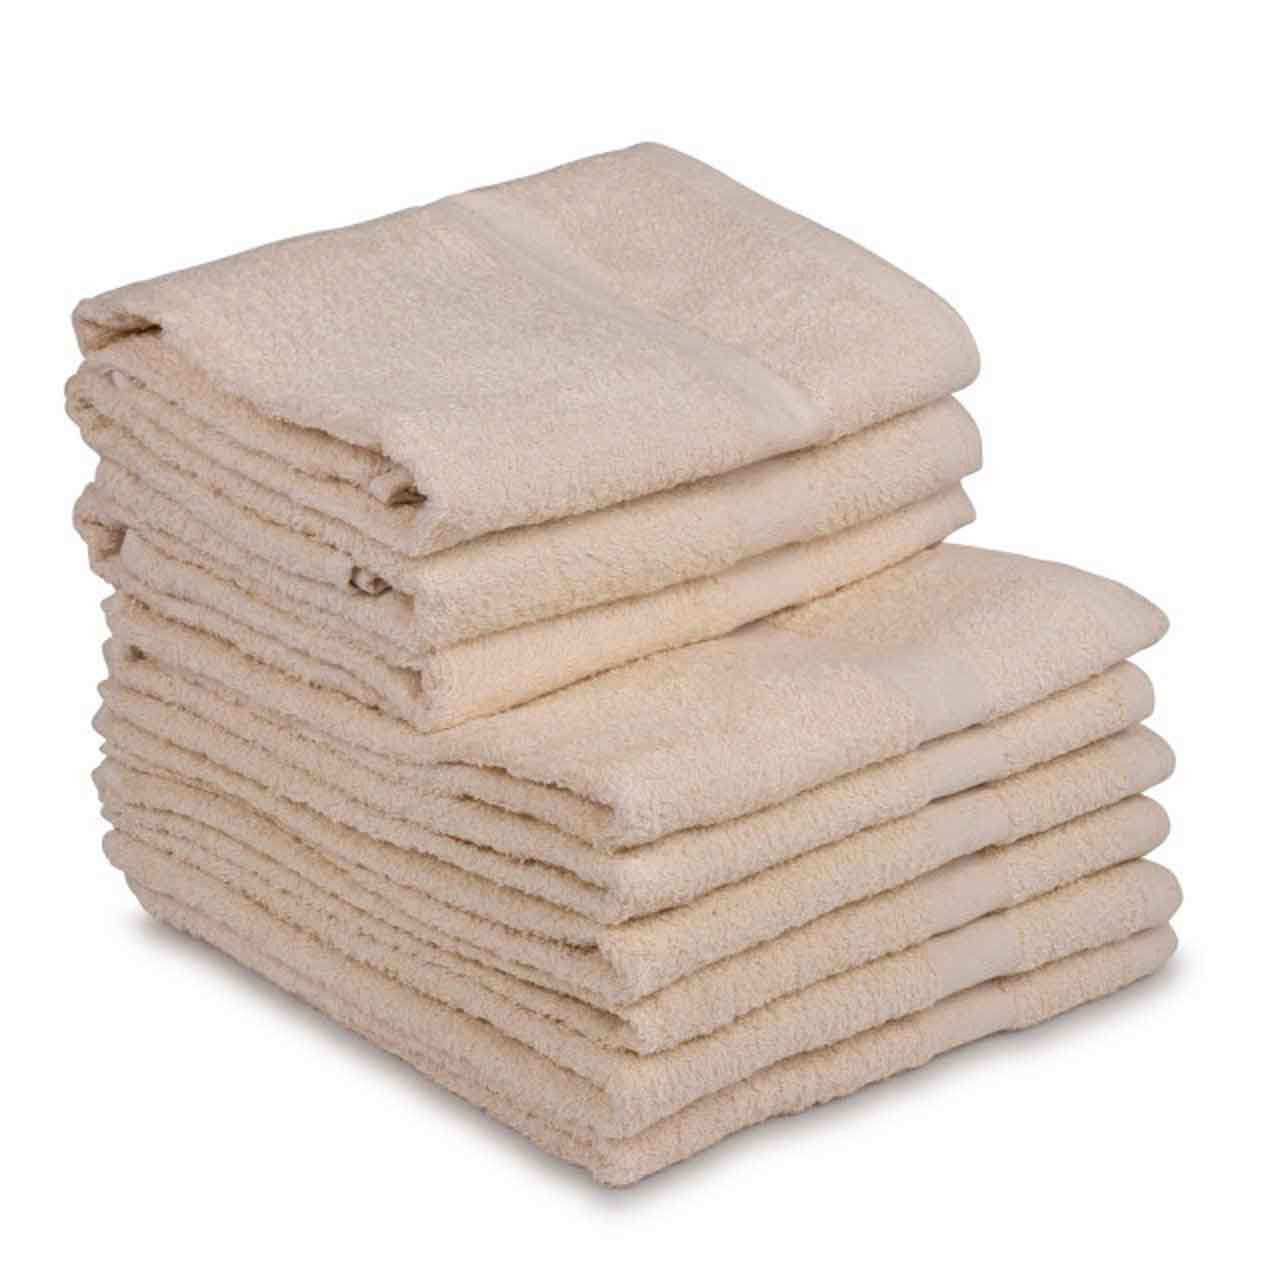 What's the best way to care for ecru towels to maintain softness and texture?